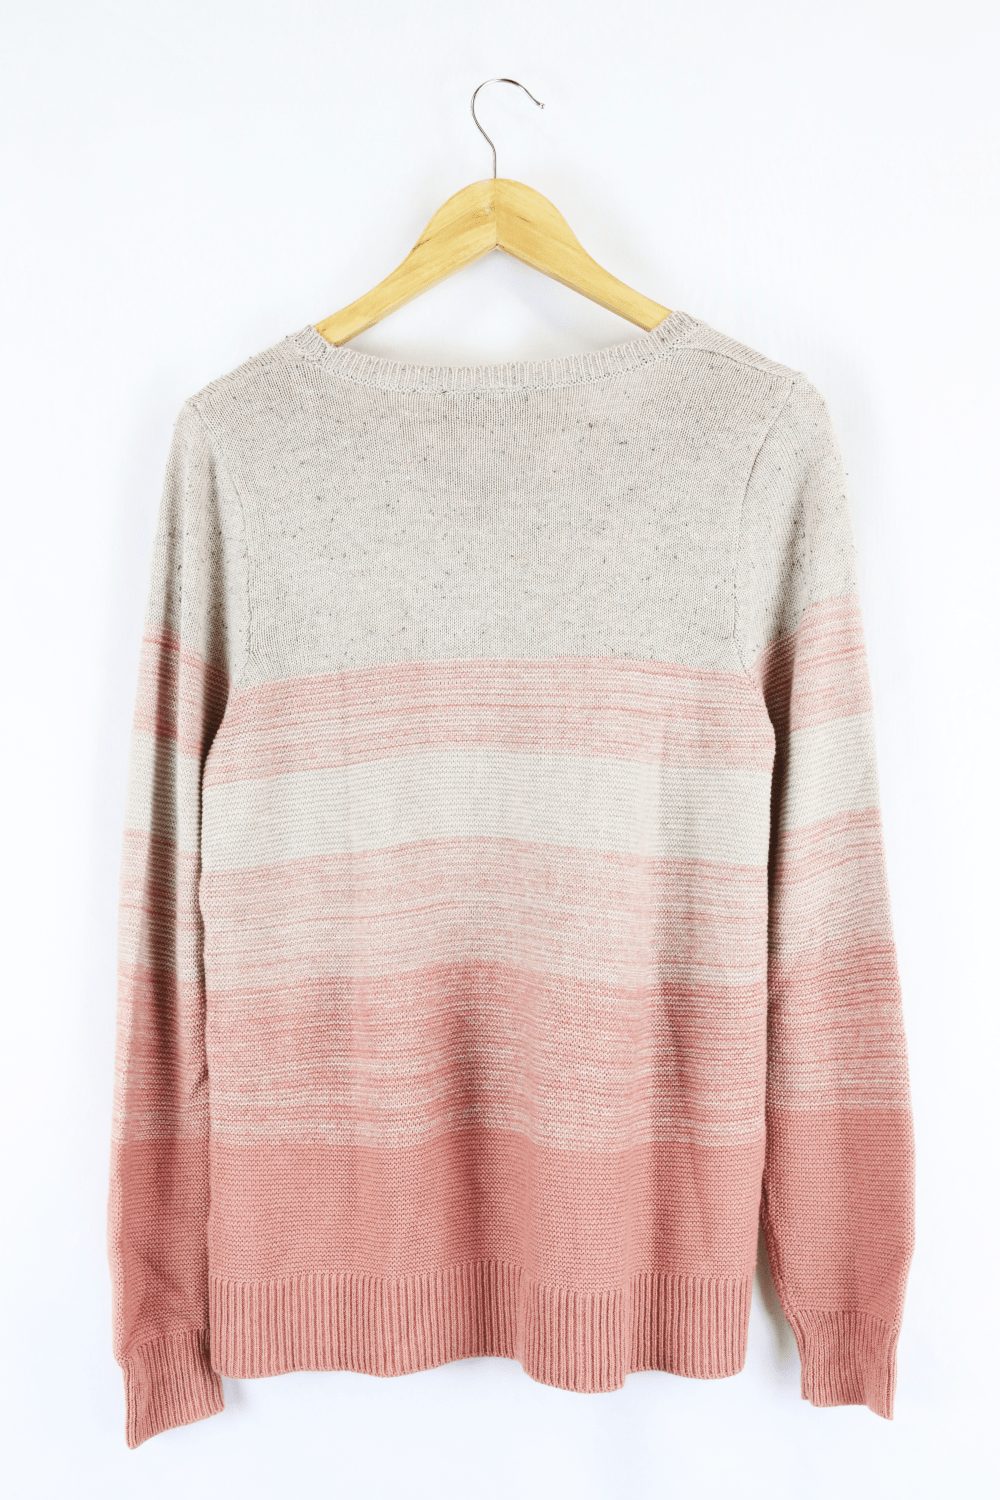 Jeanswest Pink Knitted Jumper M